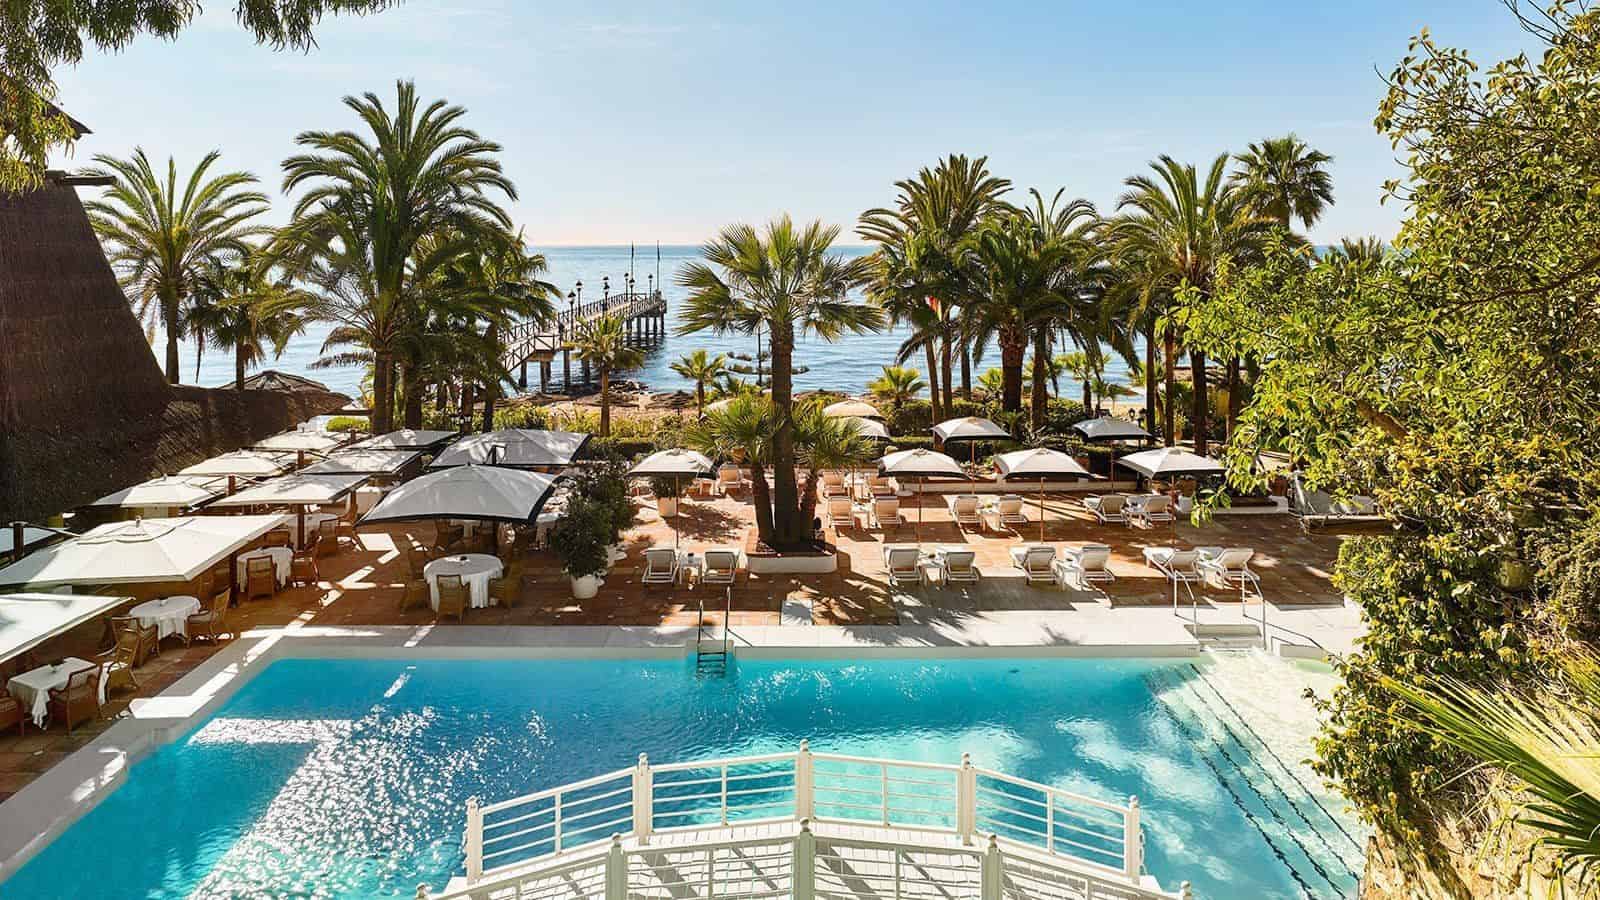 Hotel pool view with palm trees at Marbella Club Hotel in Andalucia Spain